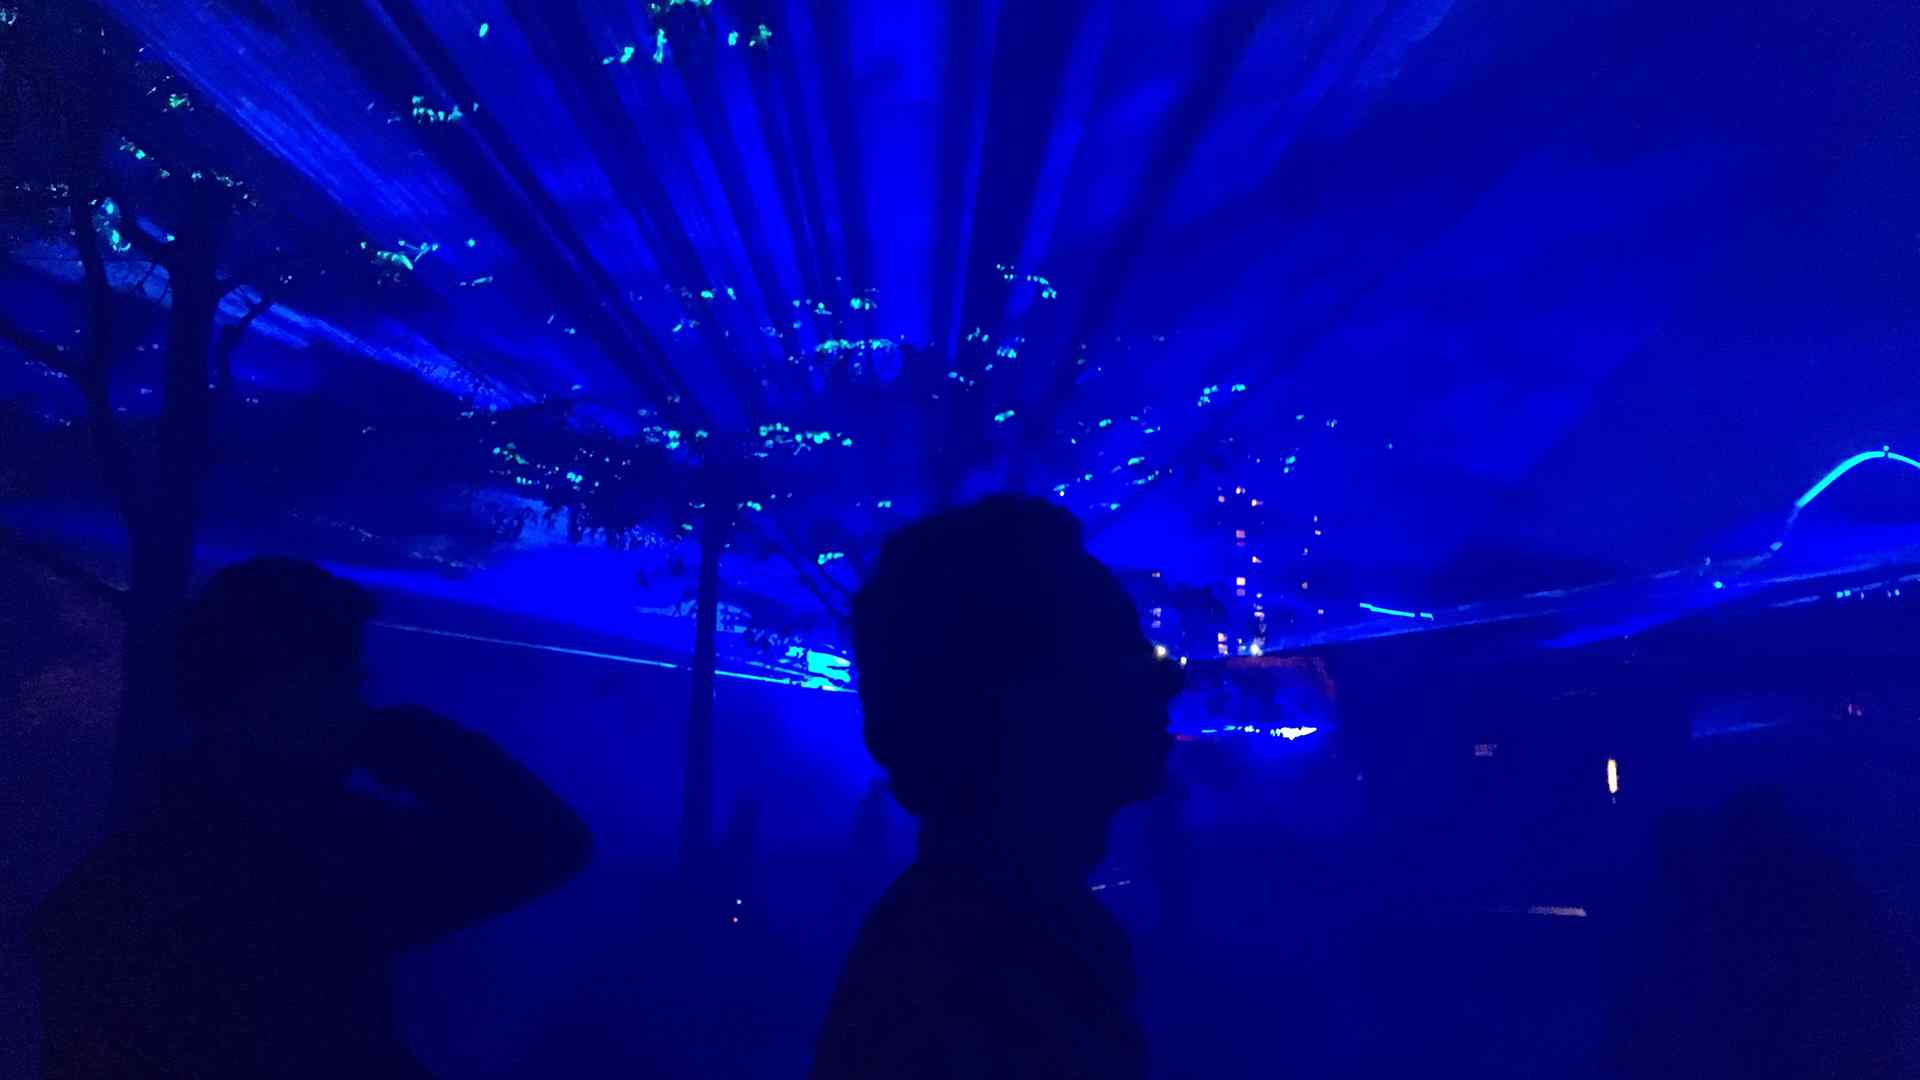 A photo of Ben silhouetted in blue light